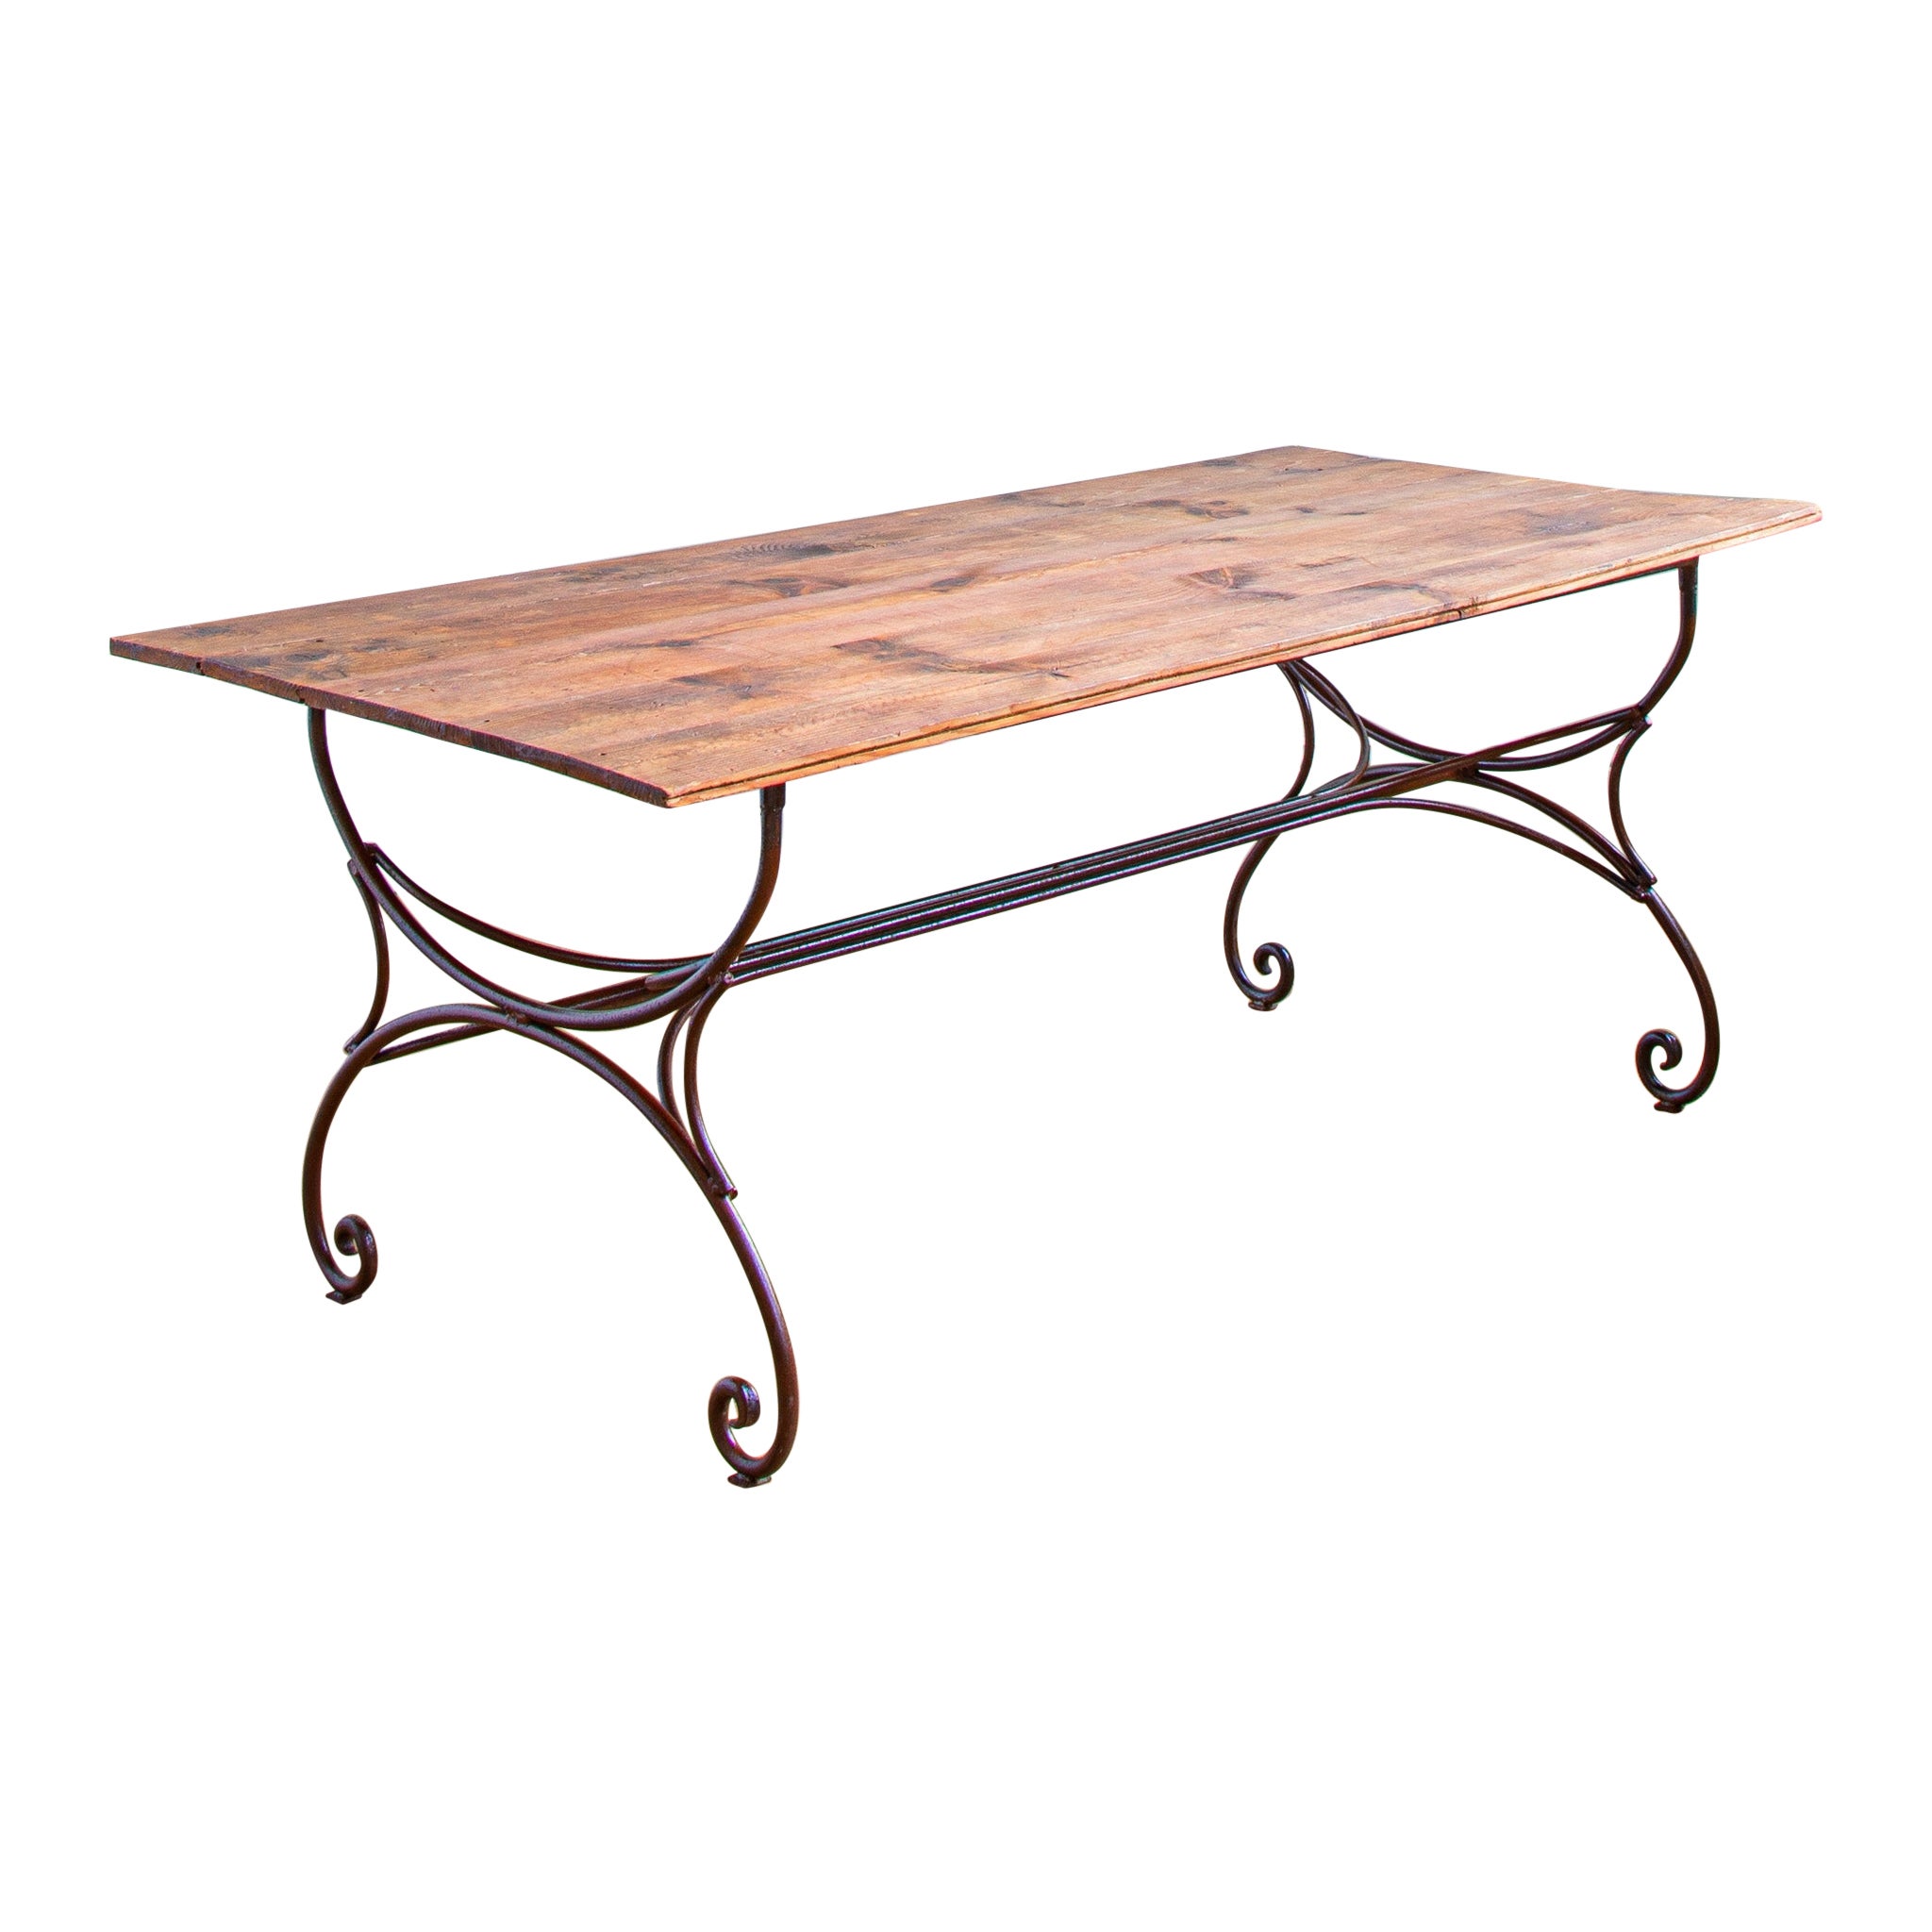 Large French Rustic Wrought Iron Dining Or Garden Table For Sale